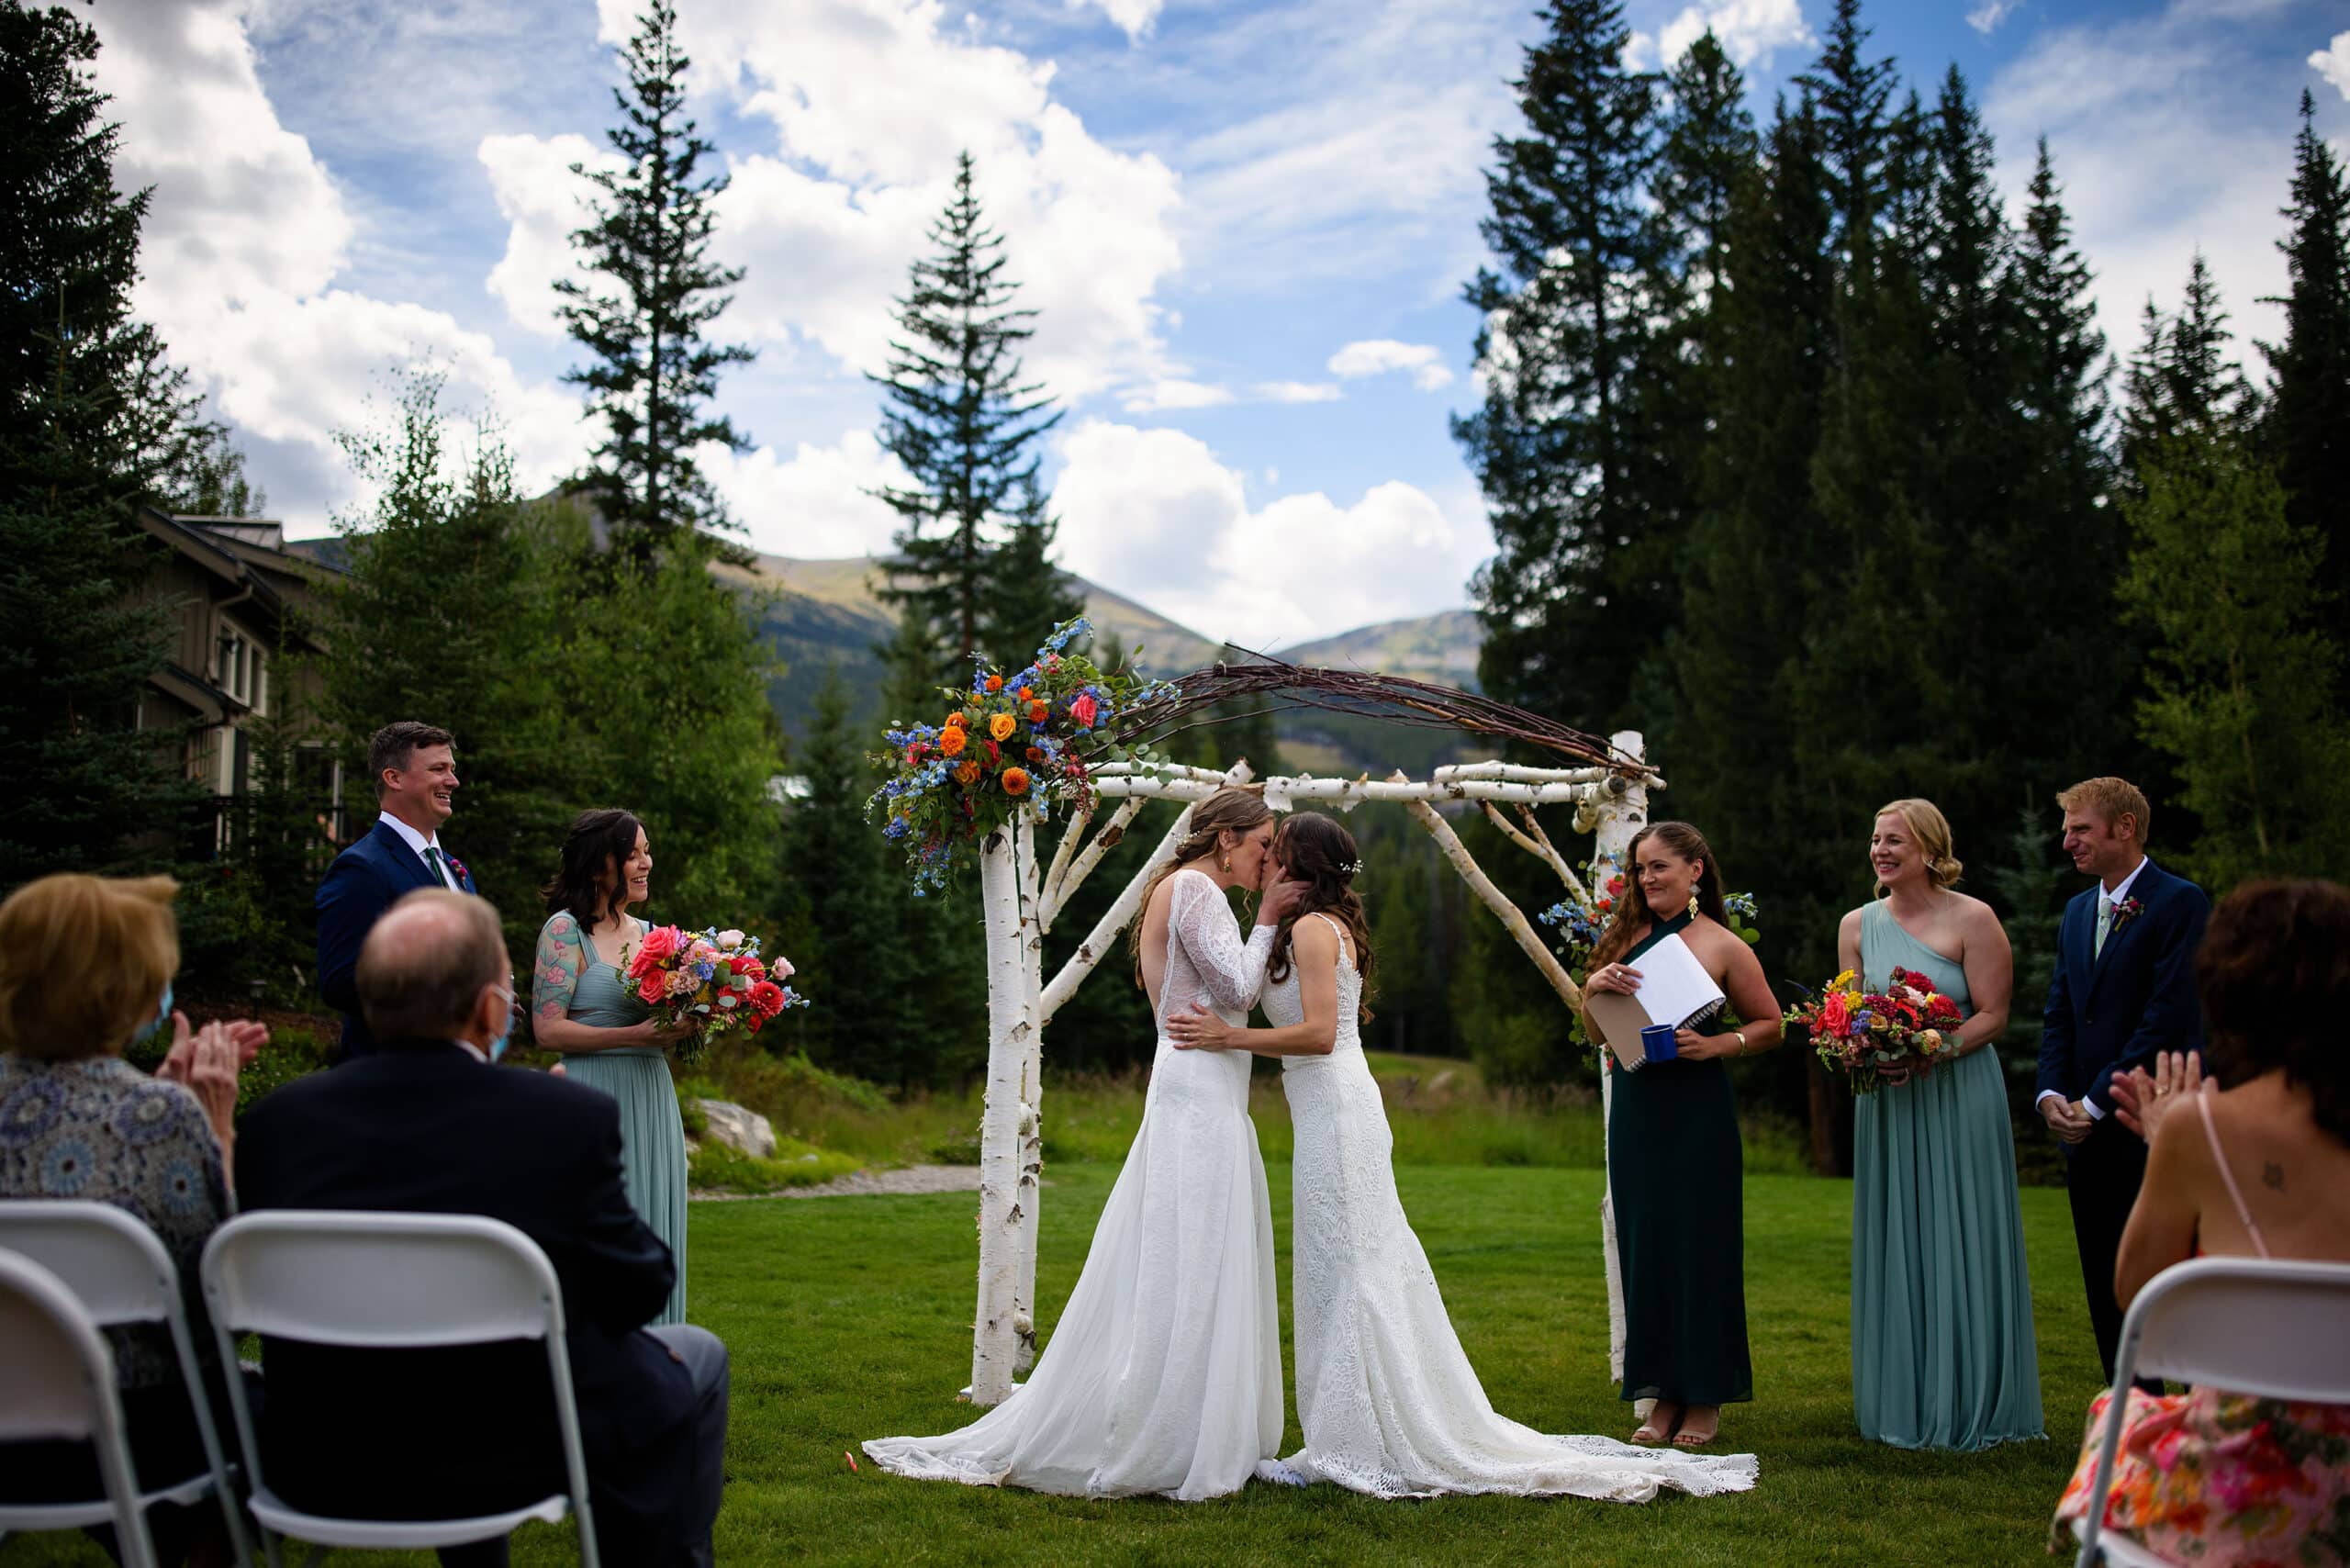 The brides share their first kiss during their ceremony at Breckenridge Nordic Center